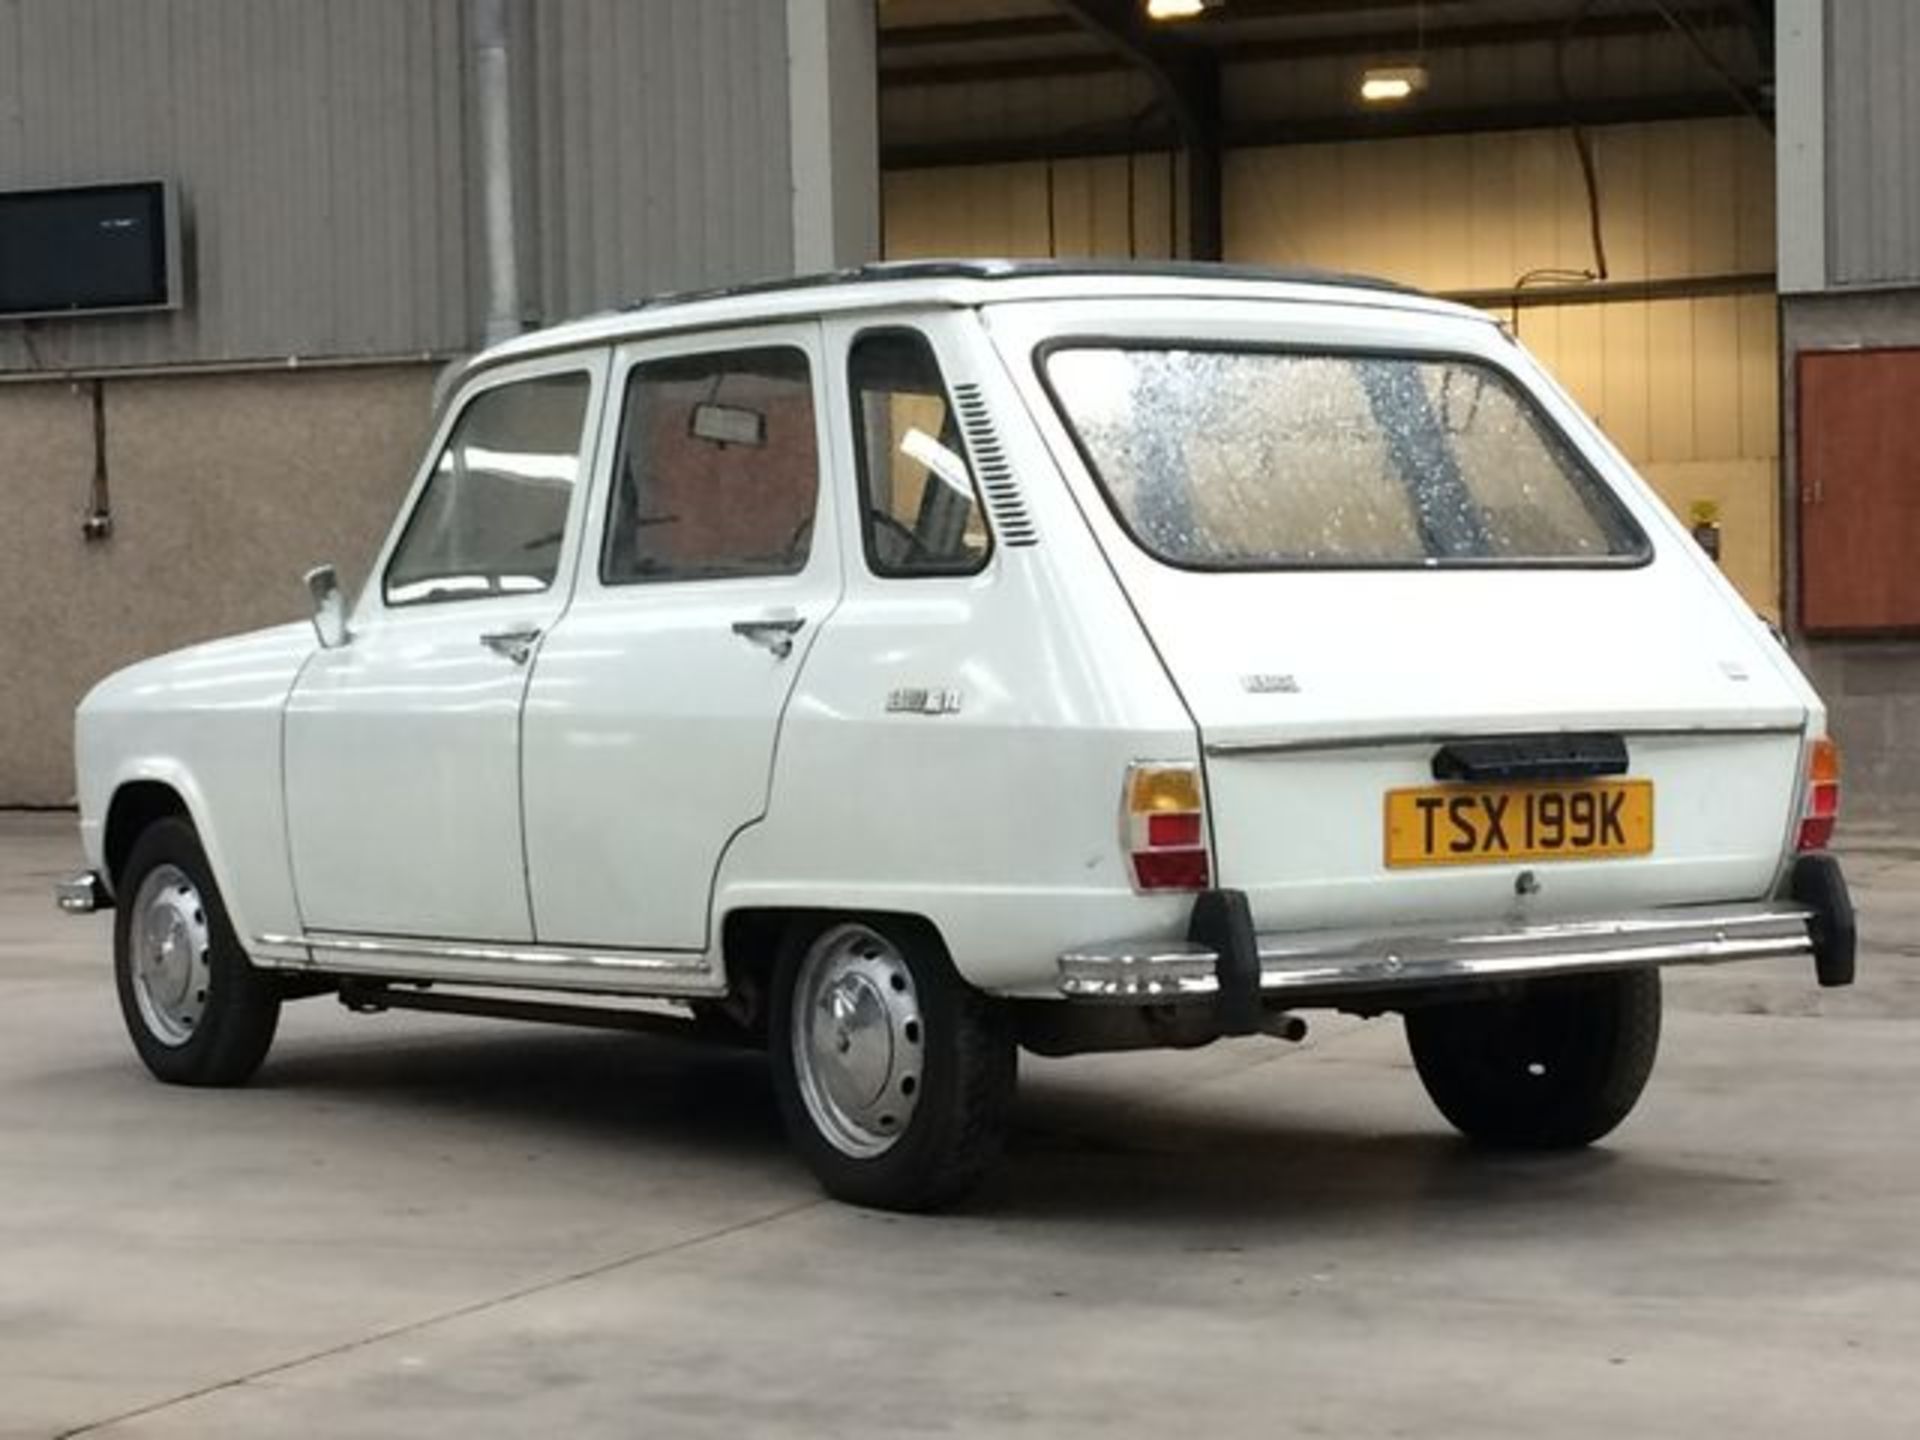 RENAULT 6 TL - 1108cc - Image 21 of 34